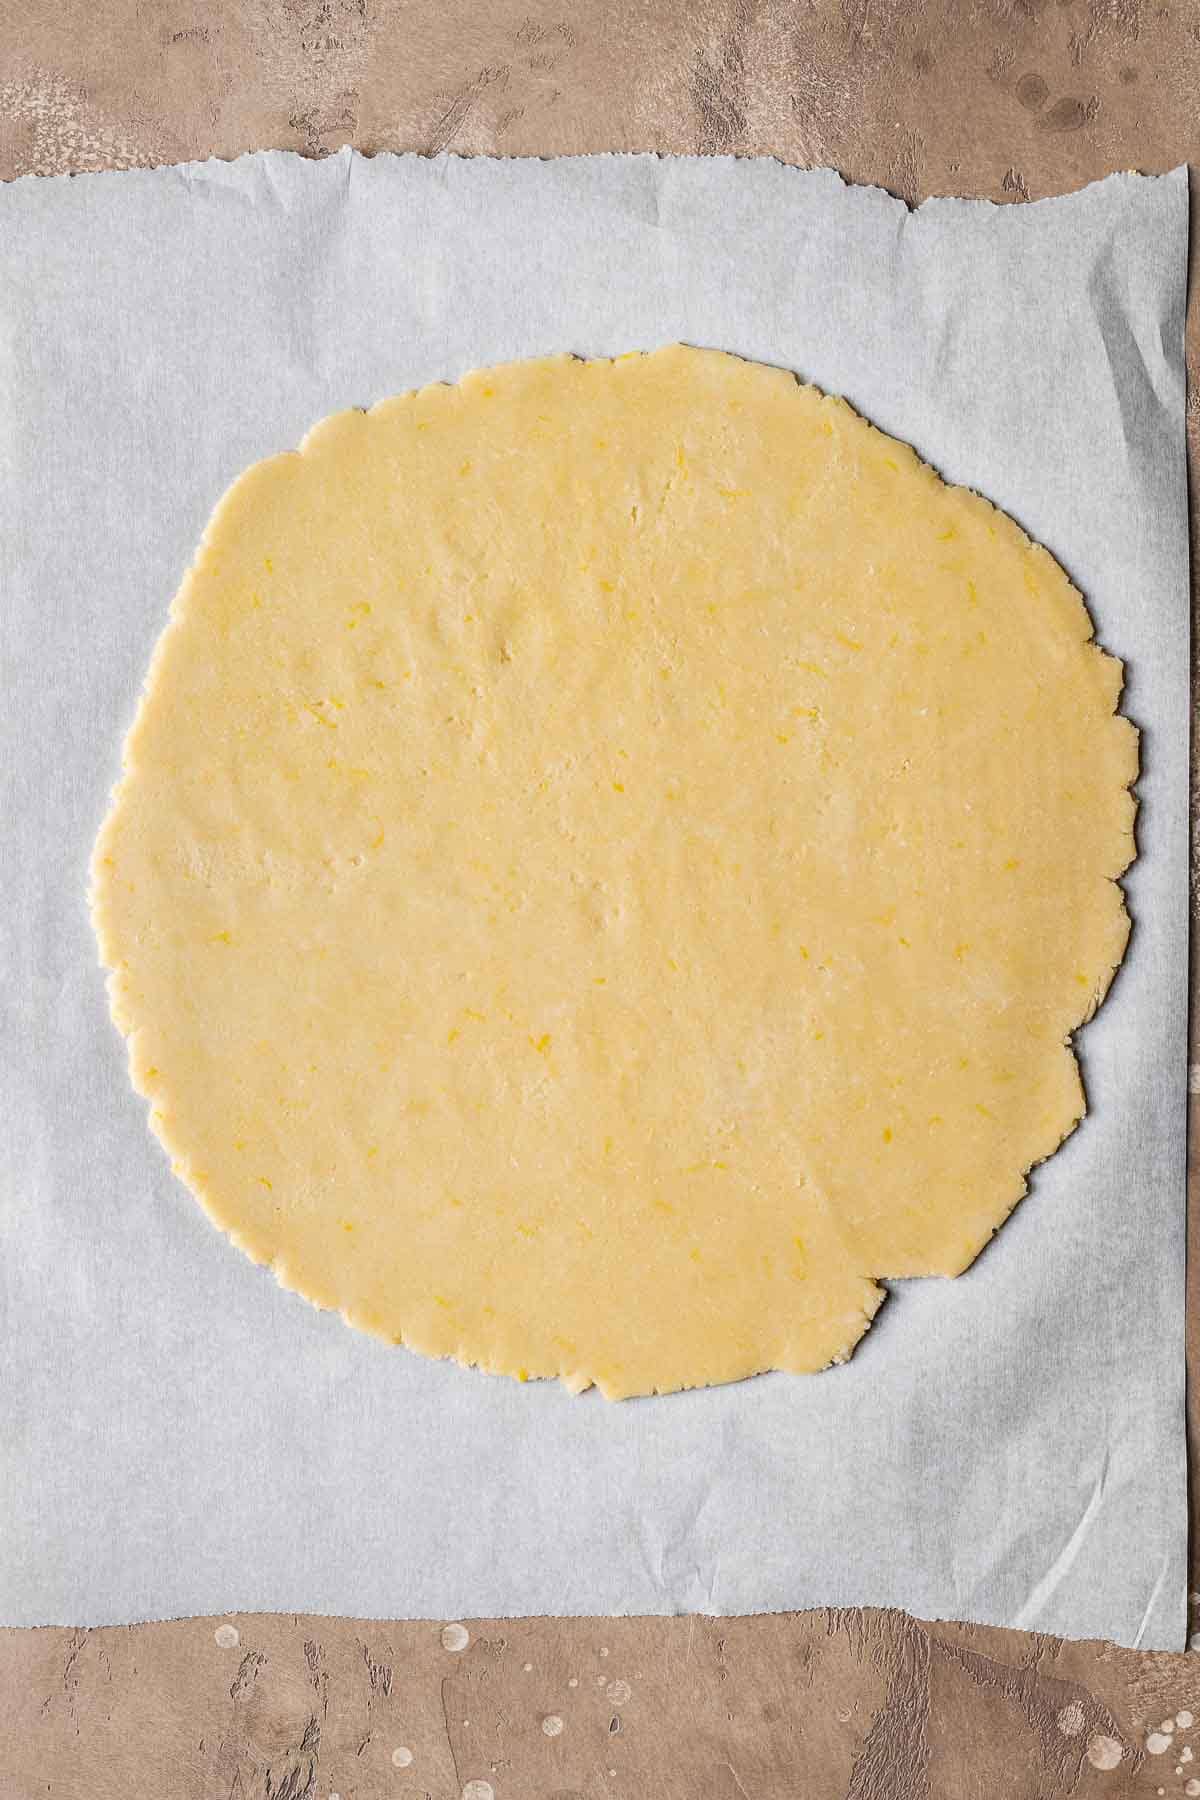 A circle of rolled pastry dough on white parchment paper.